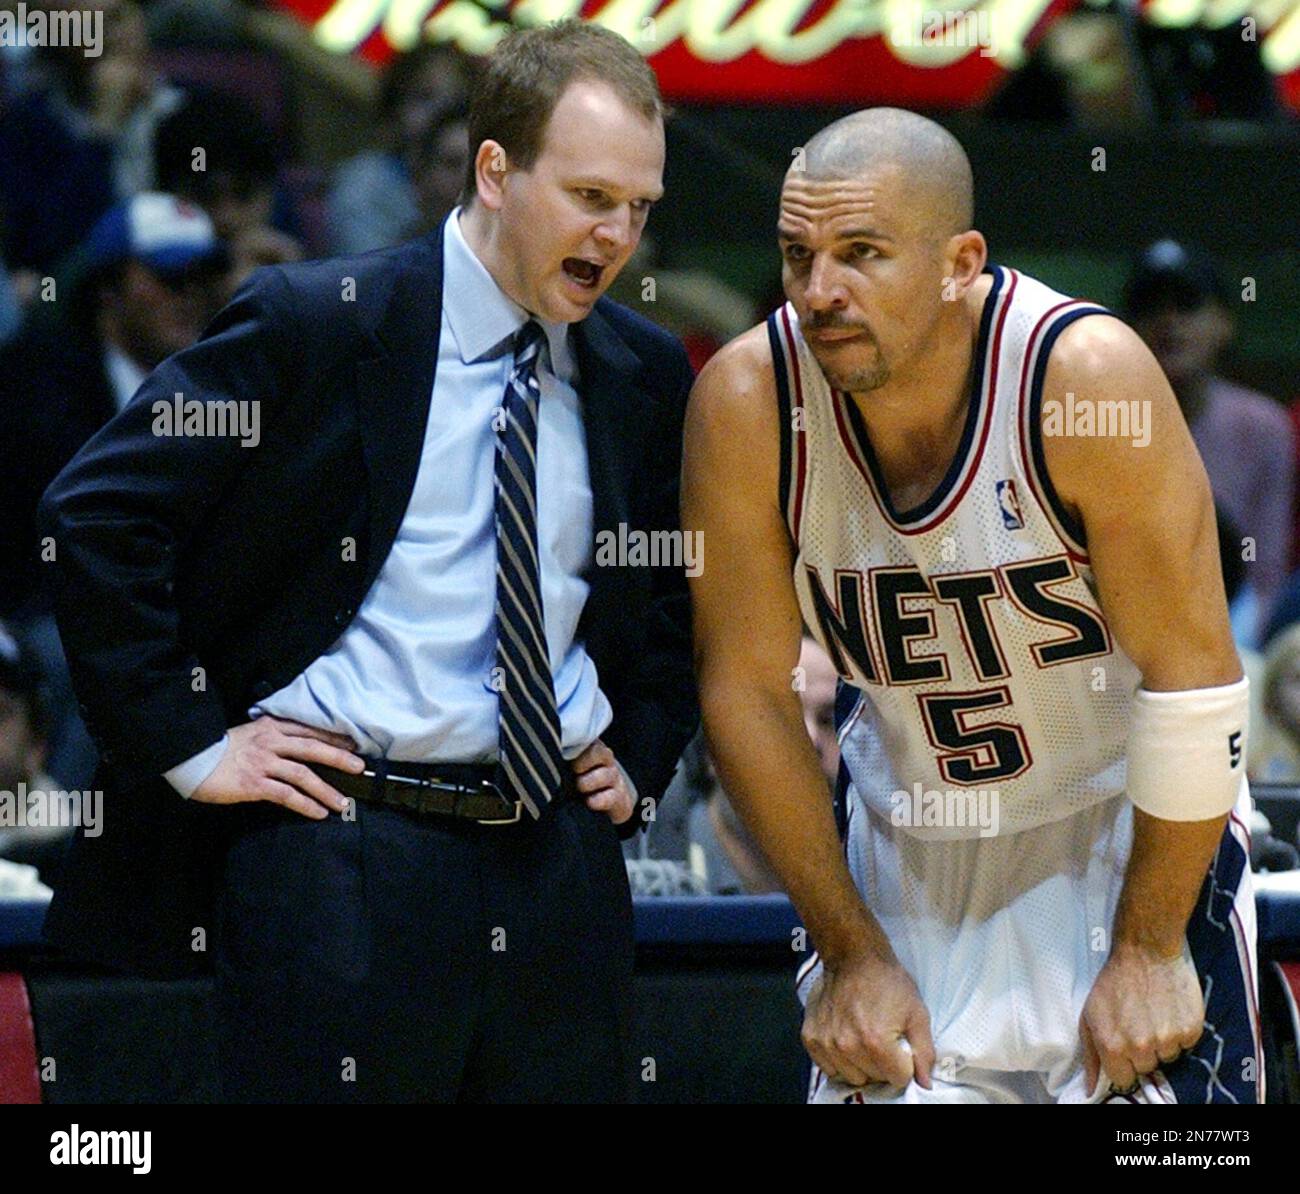 FILE - In this Feb. 5, 2005 file photo, New Jersey Nets' Jason Kidd listens  to coach Lawrence Frank during the third quarter of their 107-85 win over  the Detroit Pistons in